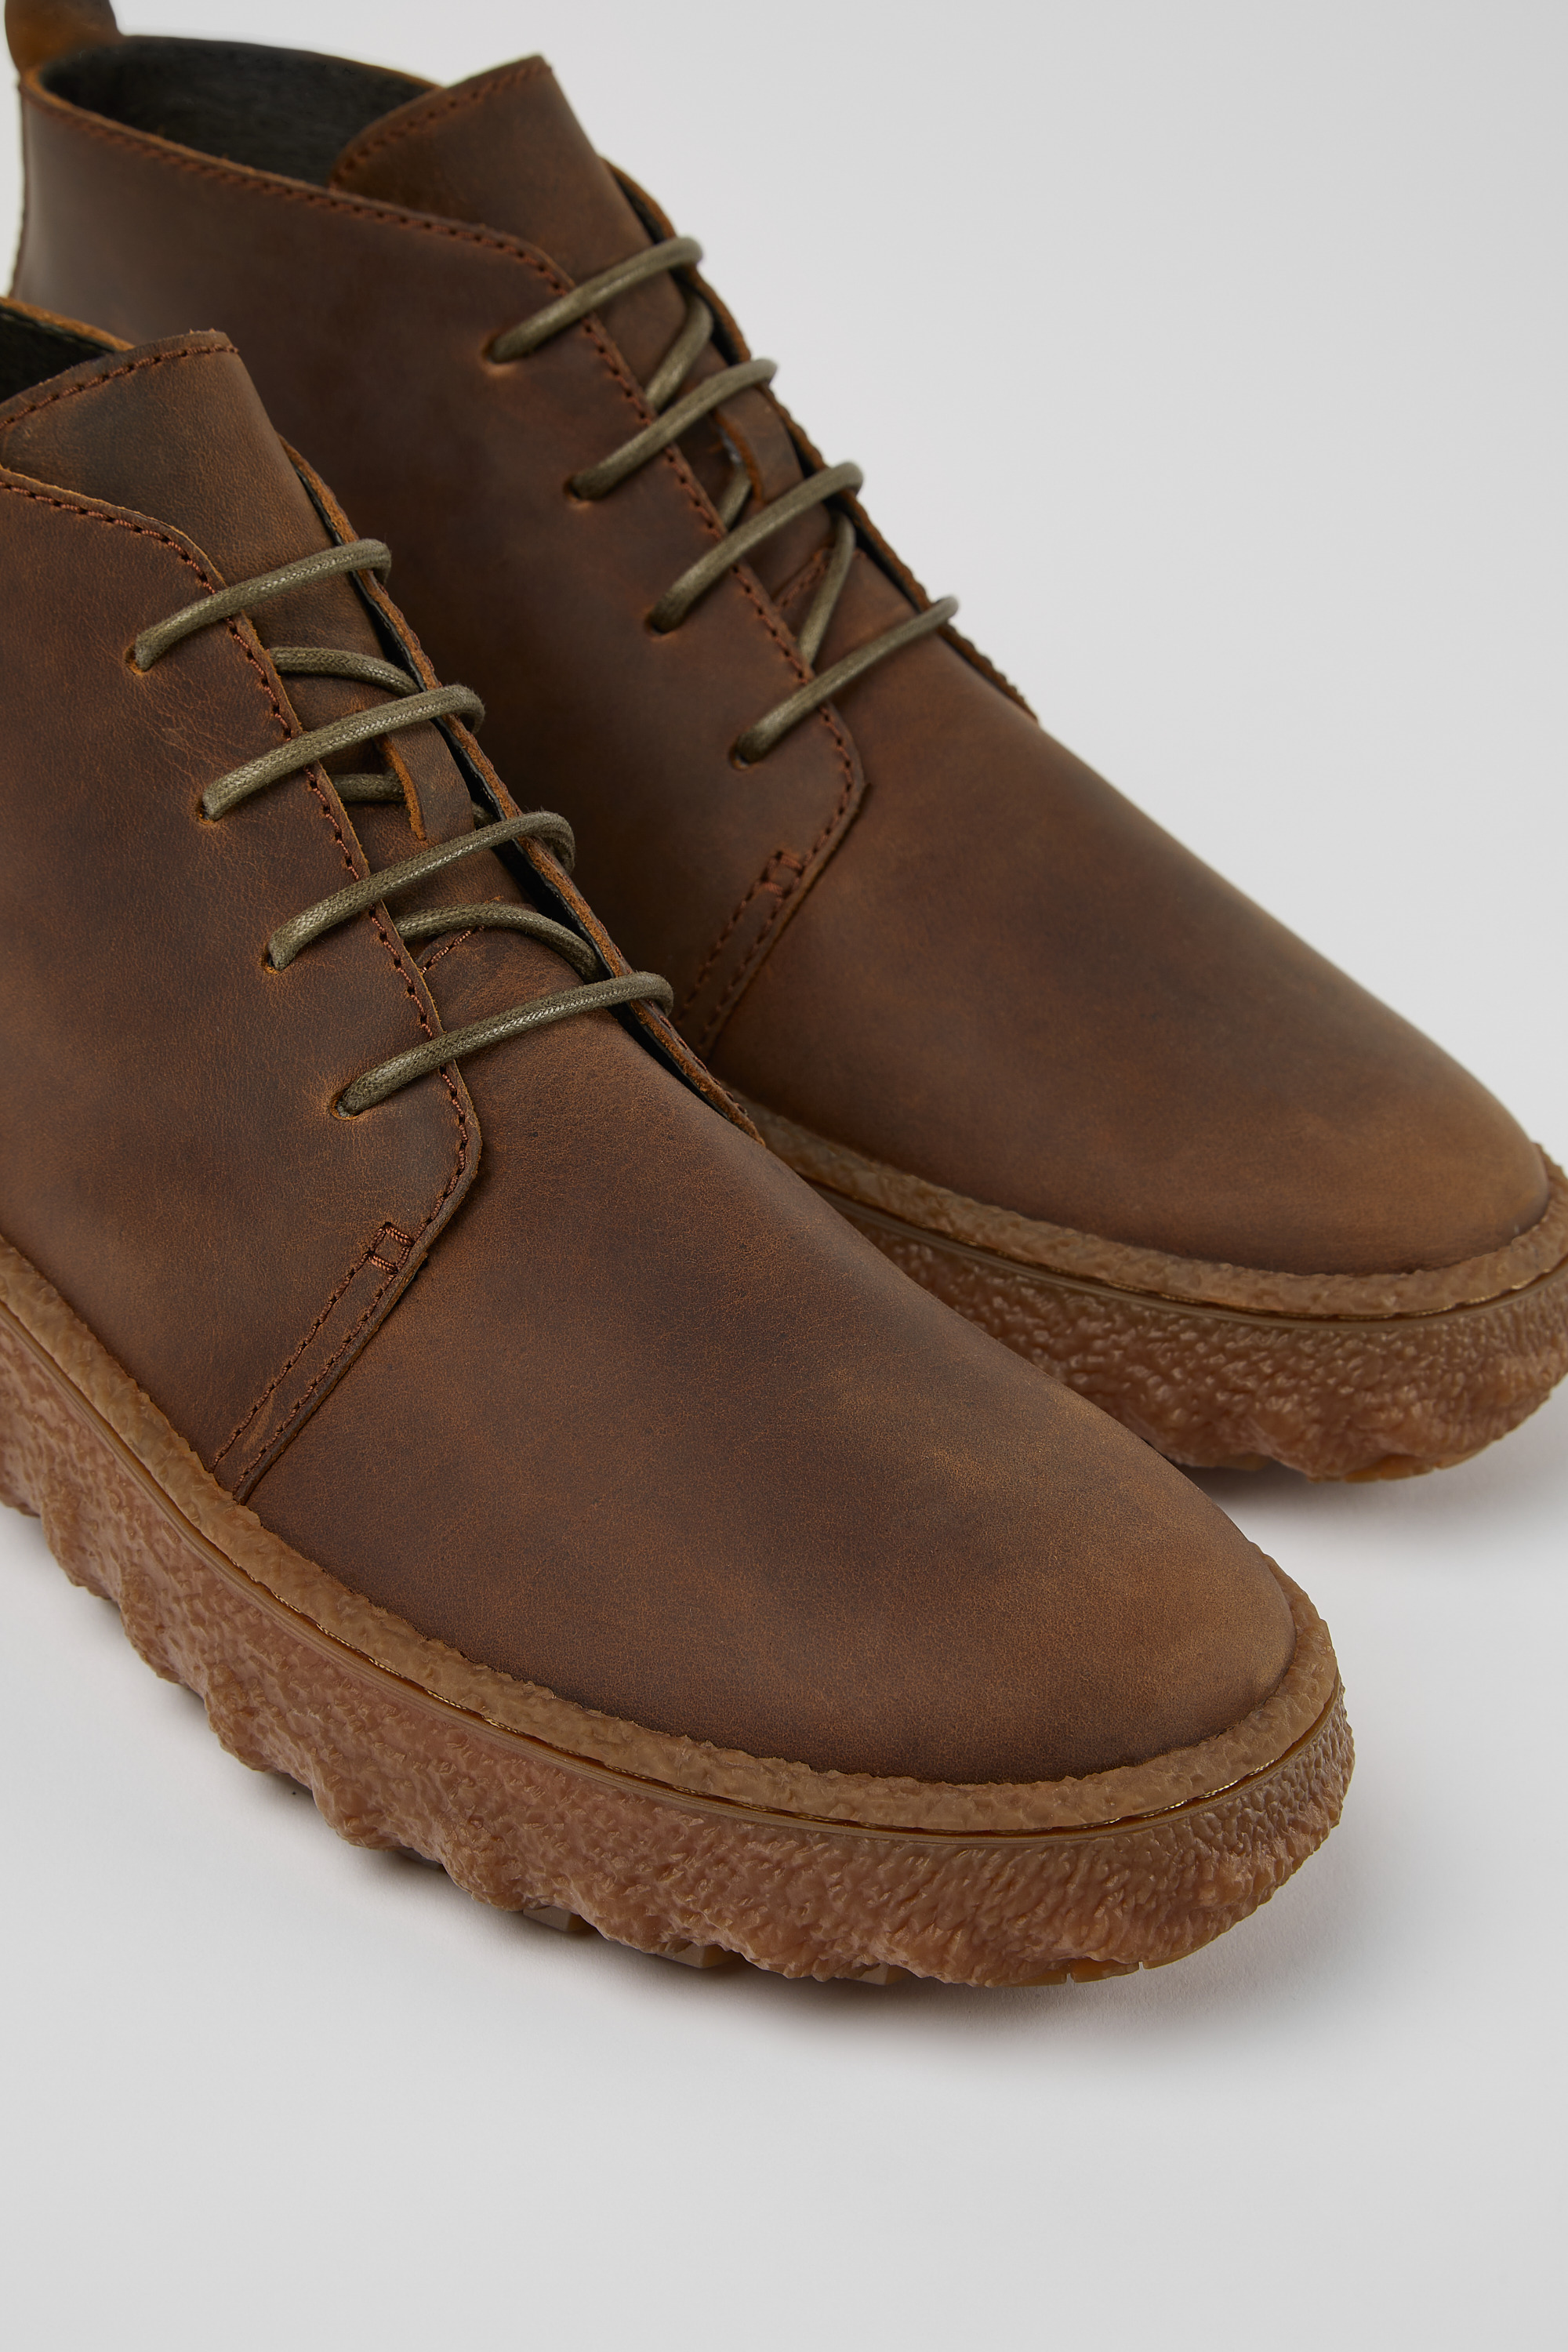 Ladders Boys Clarks Ankle Boots 